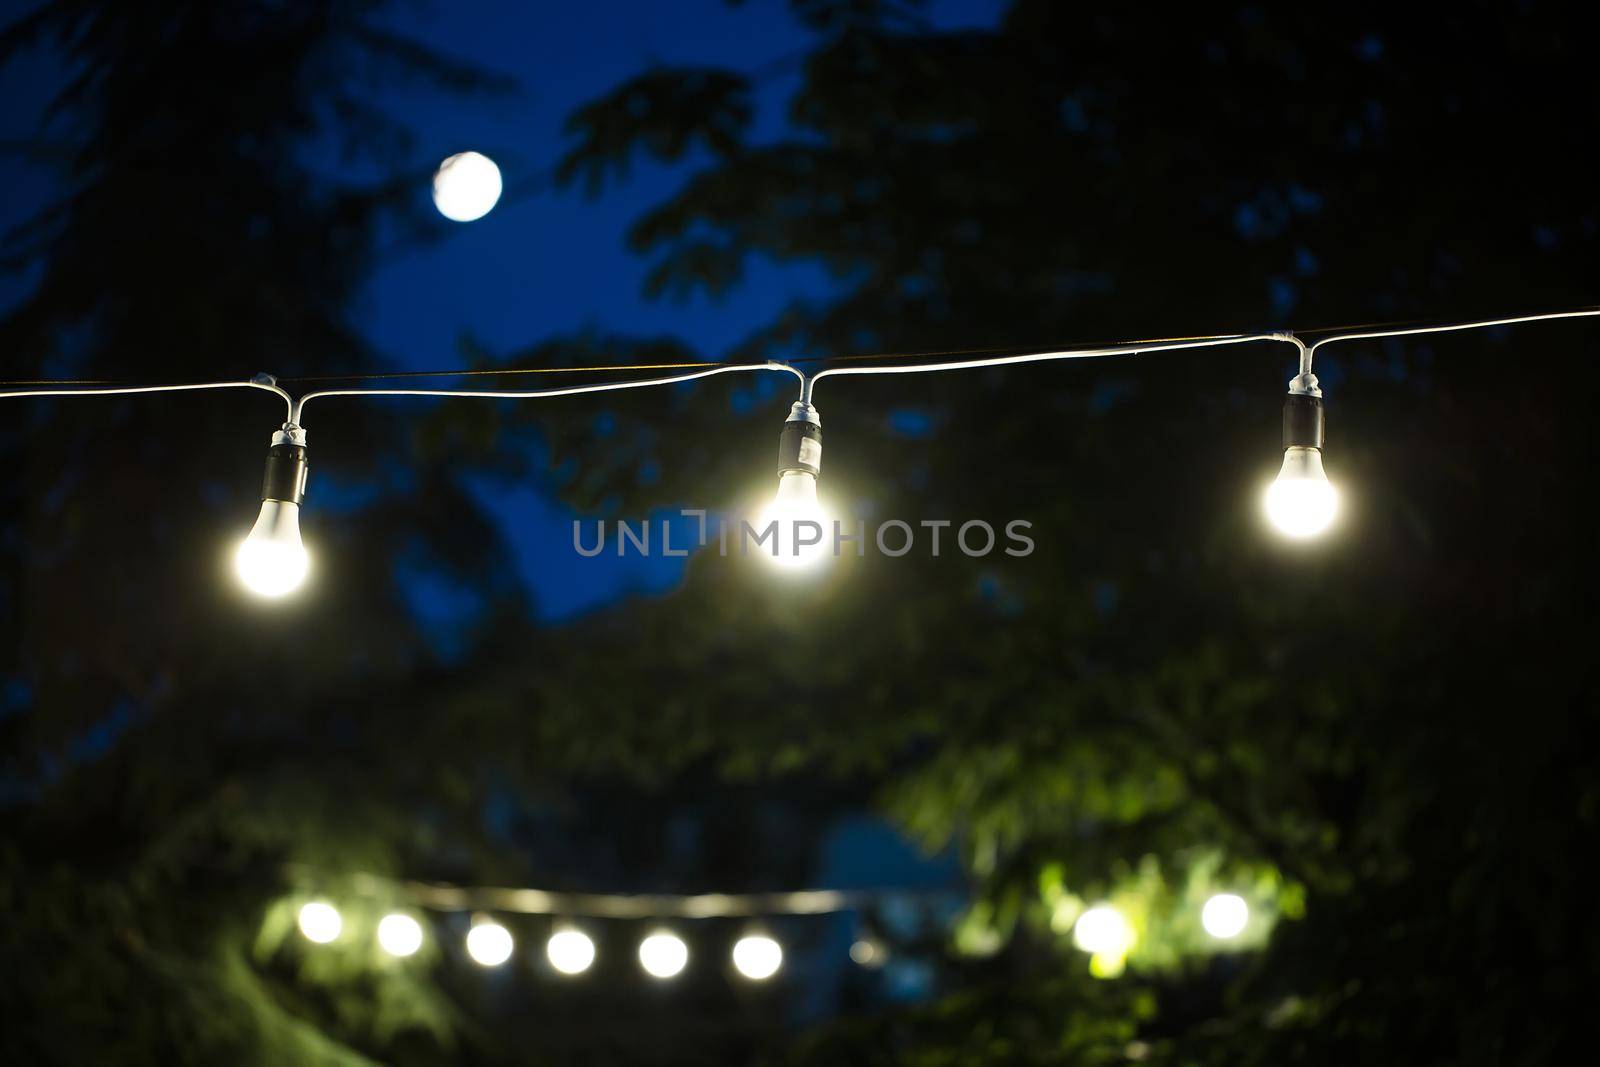 A garland of glowing light bulbs against the night sky.